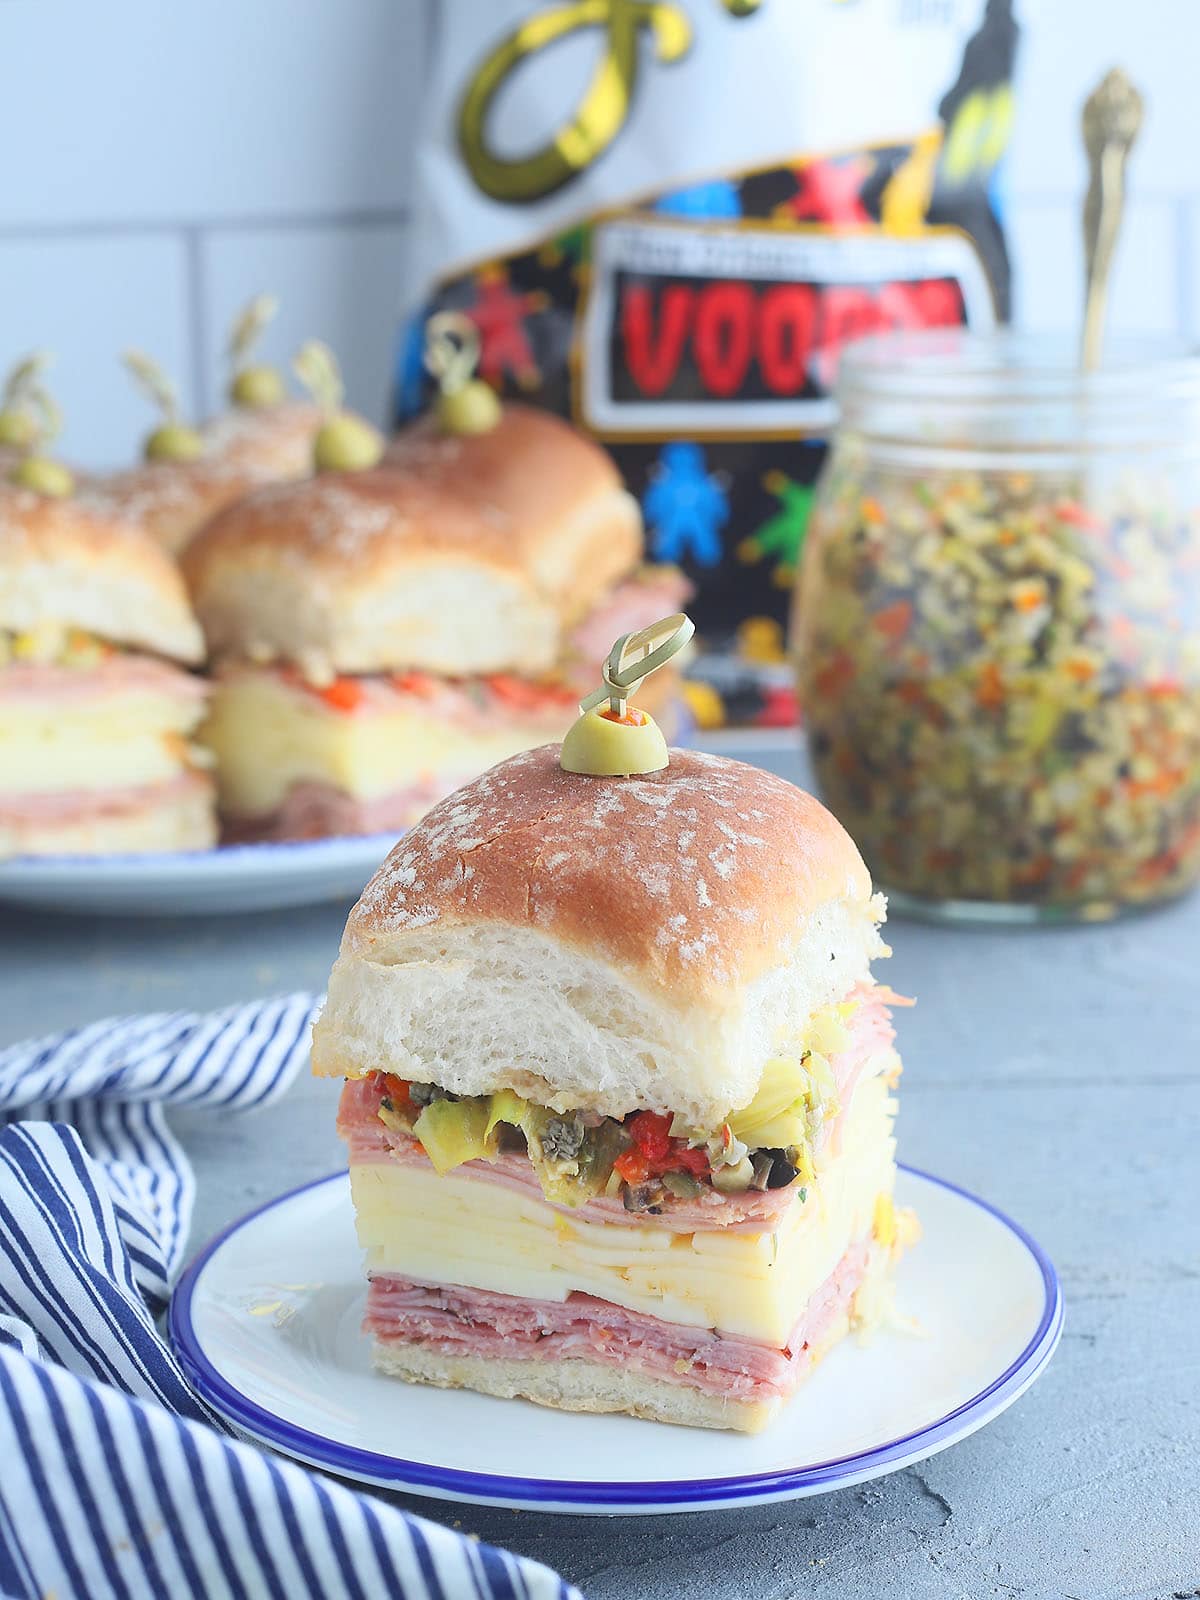 Single mini muffuletta sandwich on a small plate with additional sandwiches, a jar of olive salad and a bag of Zap's potato chips in the background.